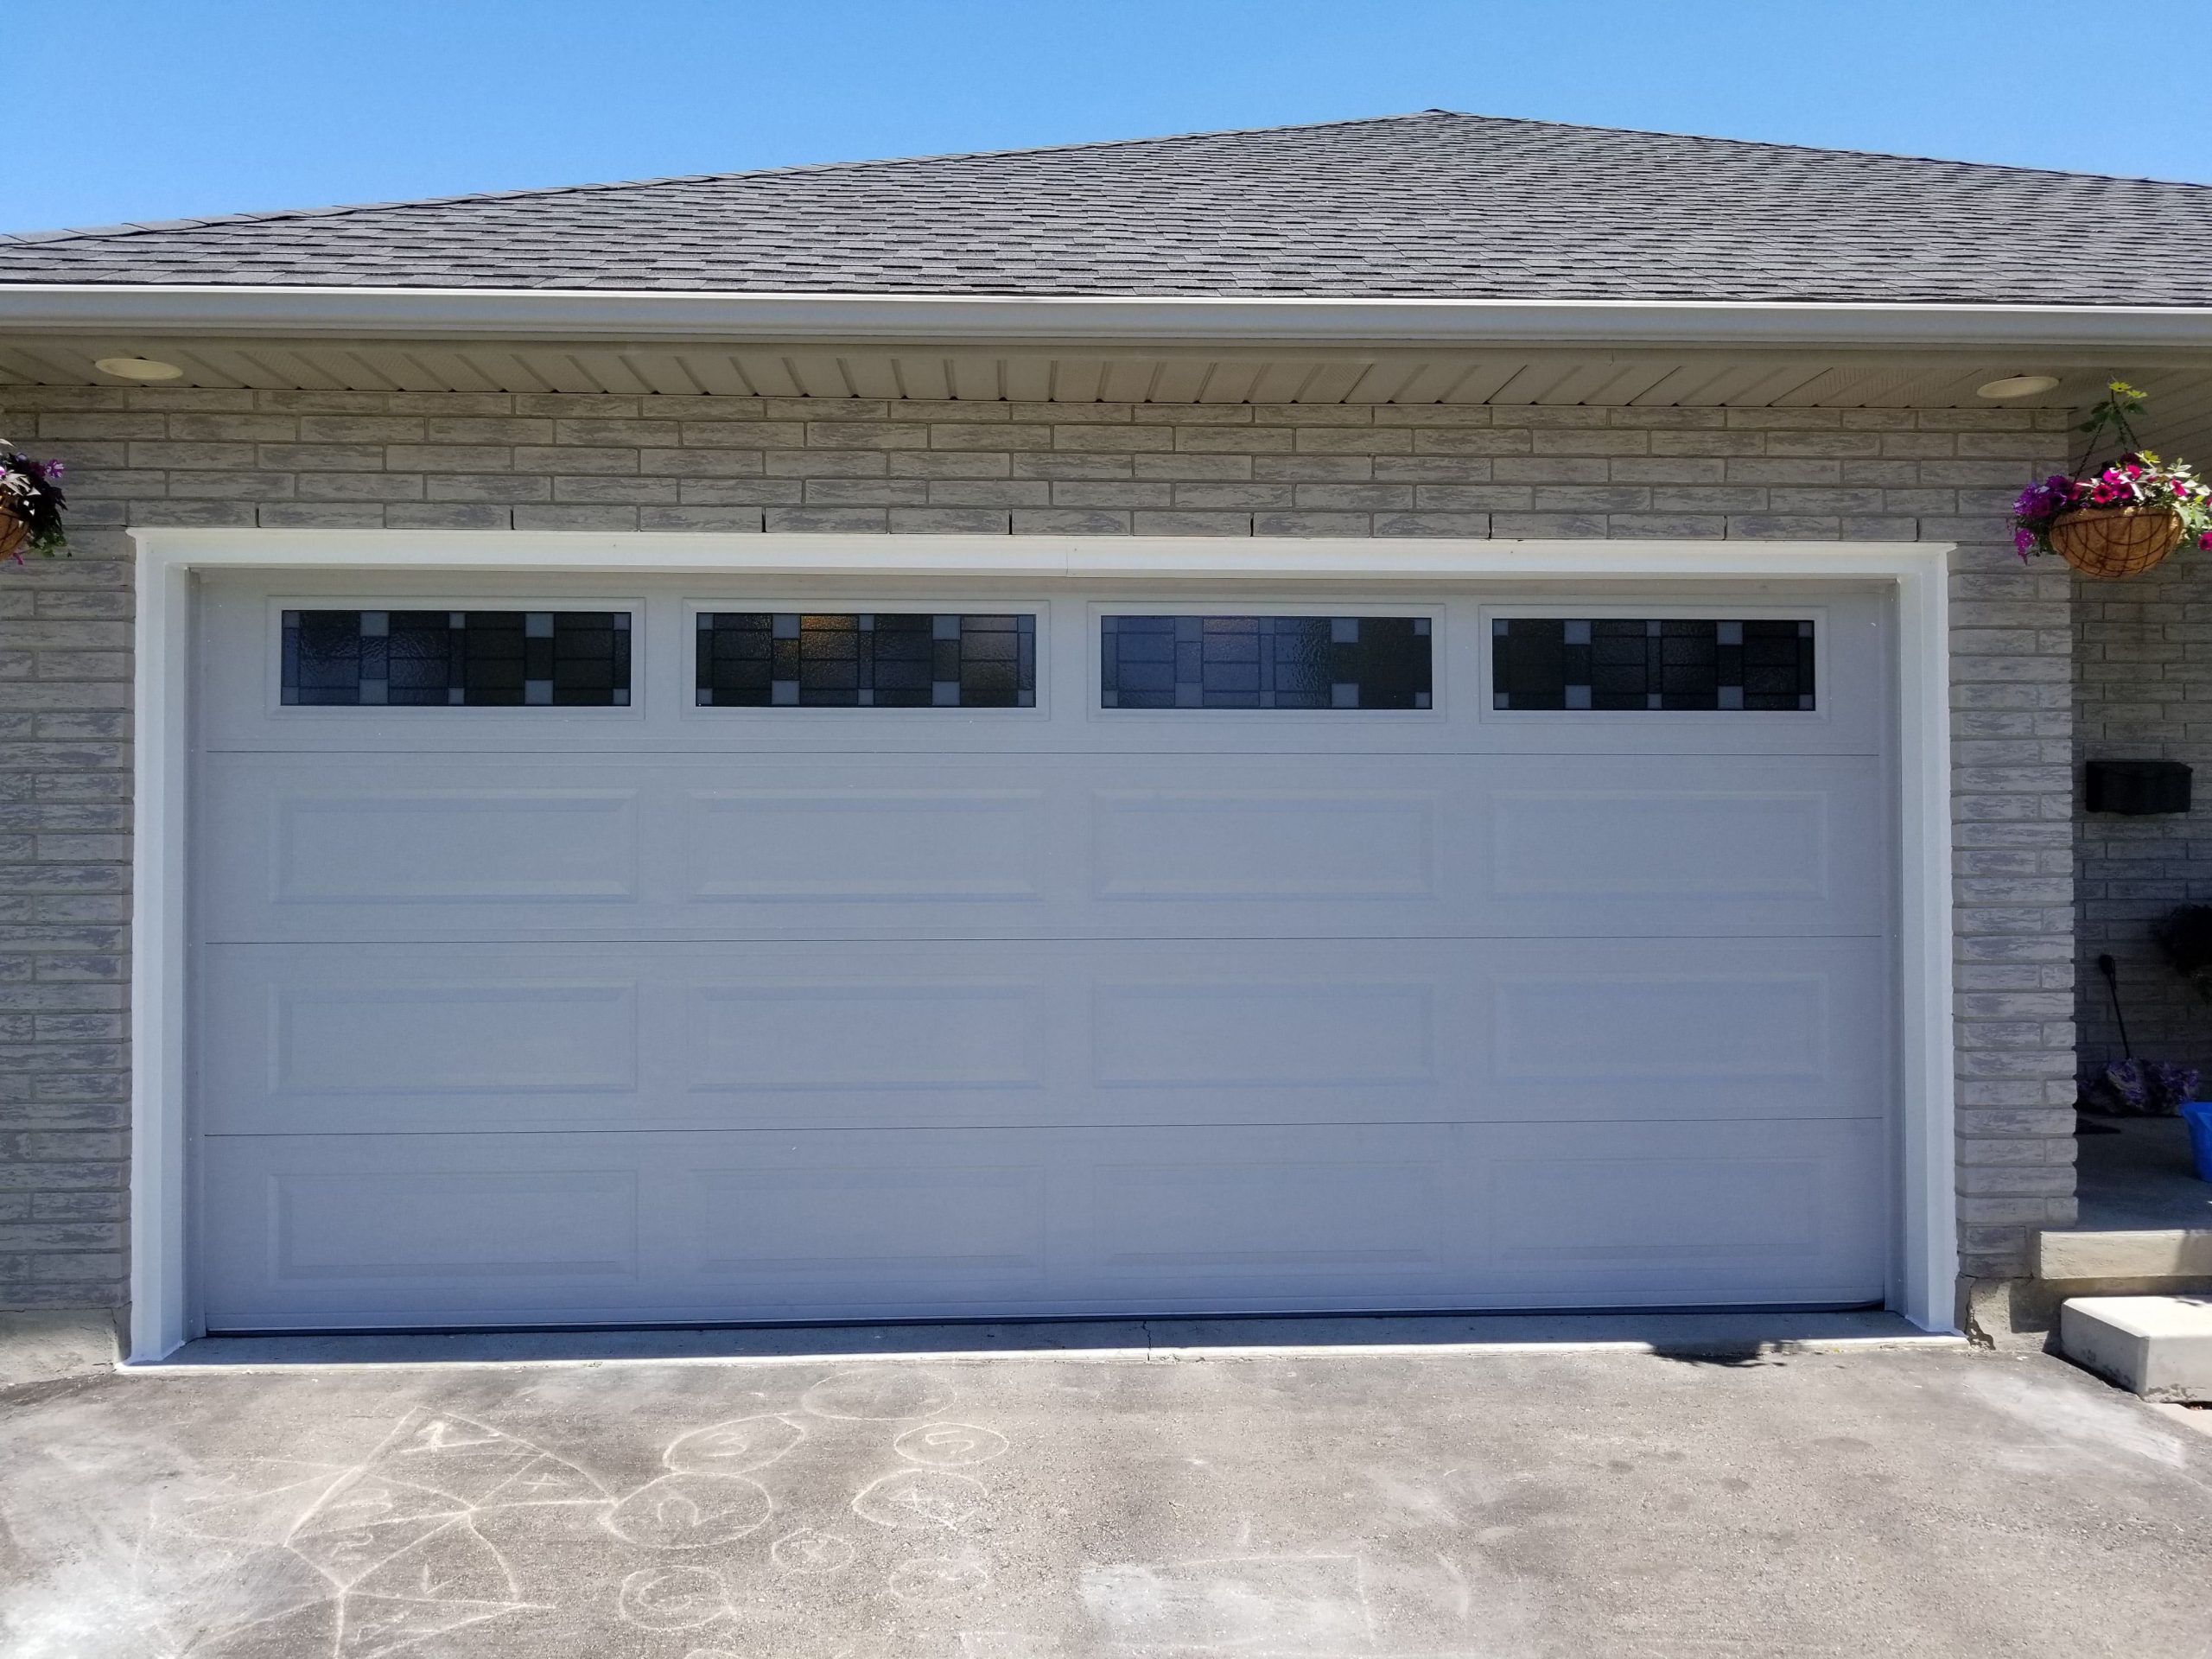  How Much Is A Commercial Garage Door for Small Space